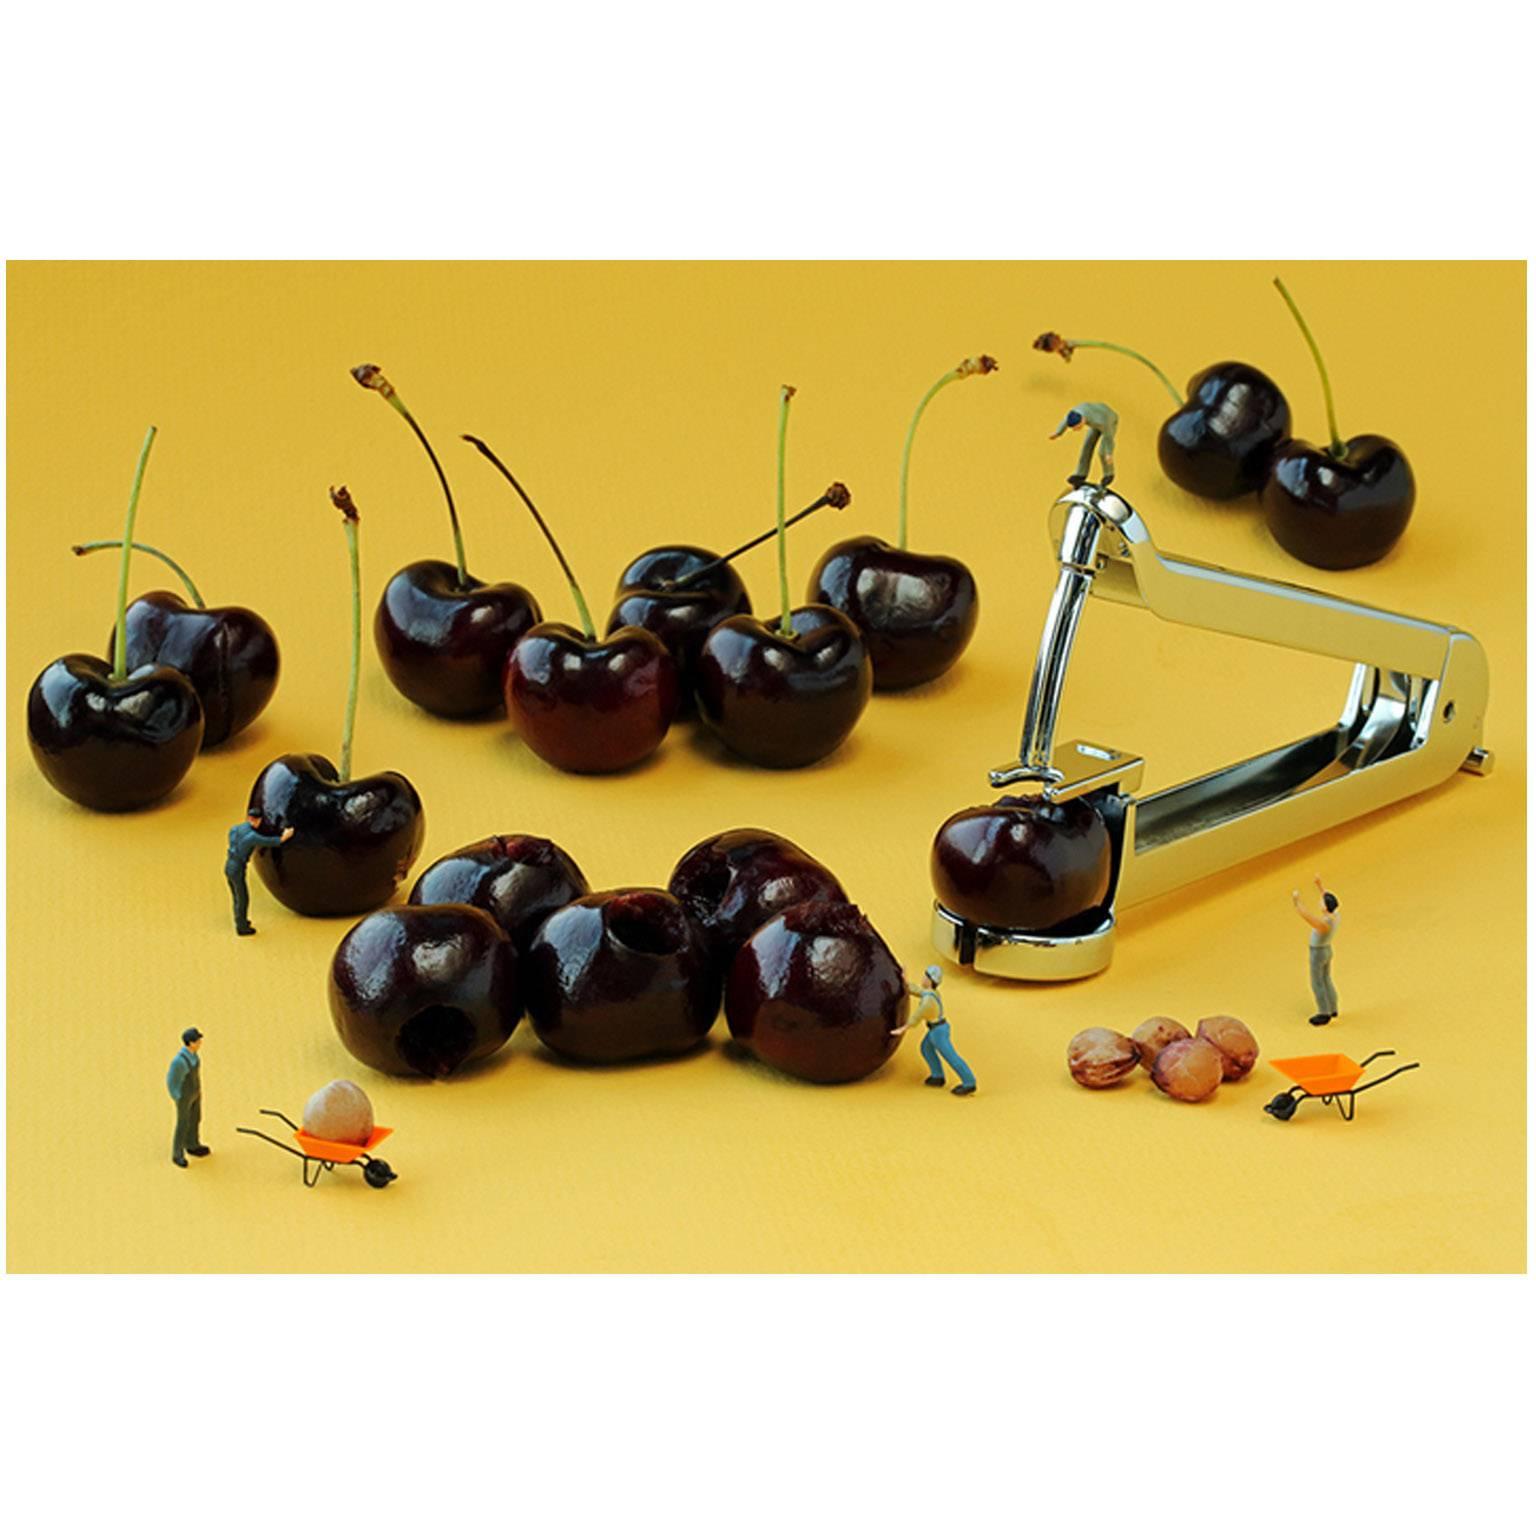 Christopher Boffoli Color Photograph - Cherry Pitters